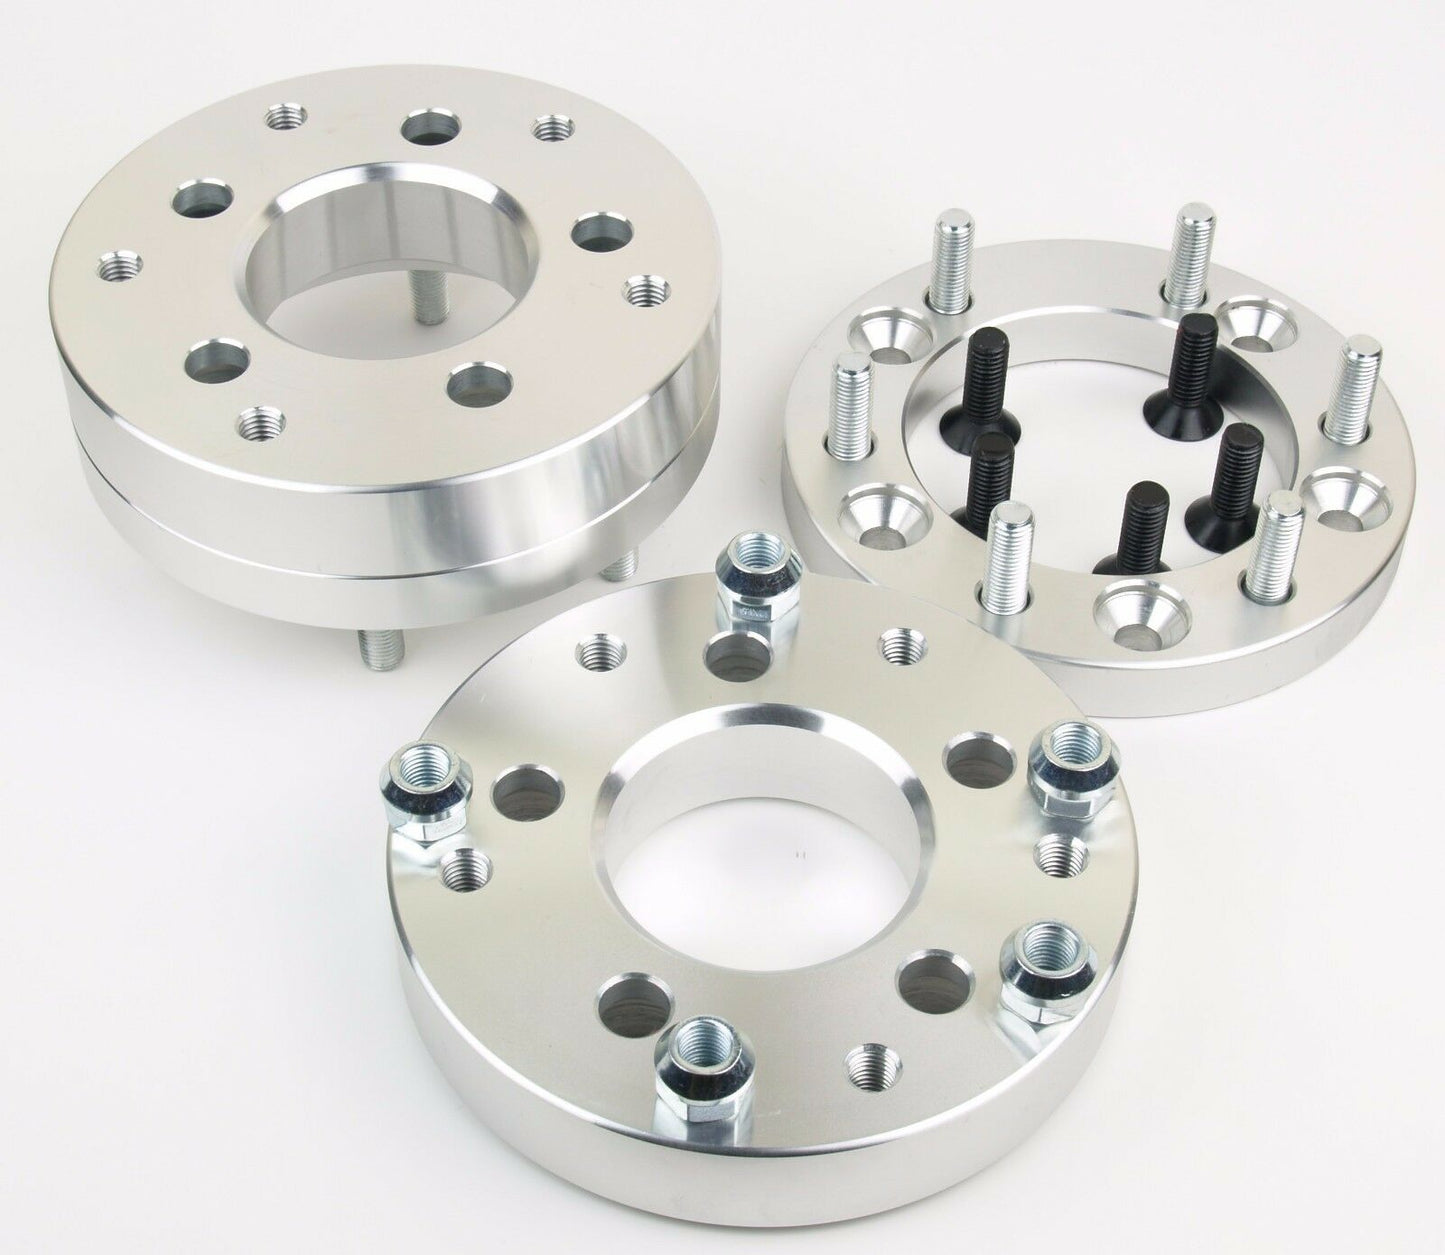 6X5.5 TO 5X4.5 WHEEL ADAPTERS  USE 5 LUG WHEELS ON 6 LUG TOYOTA TRUCK –  Spacer Experts